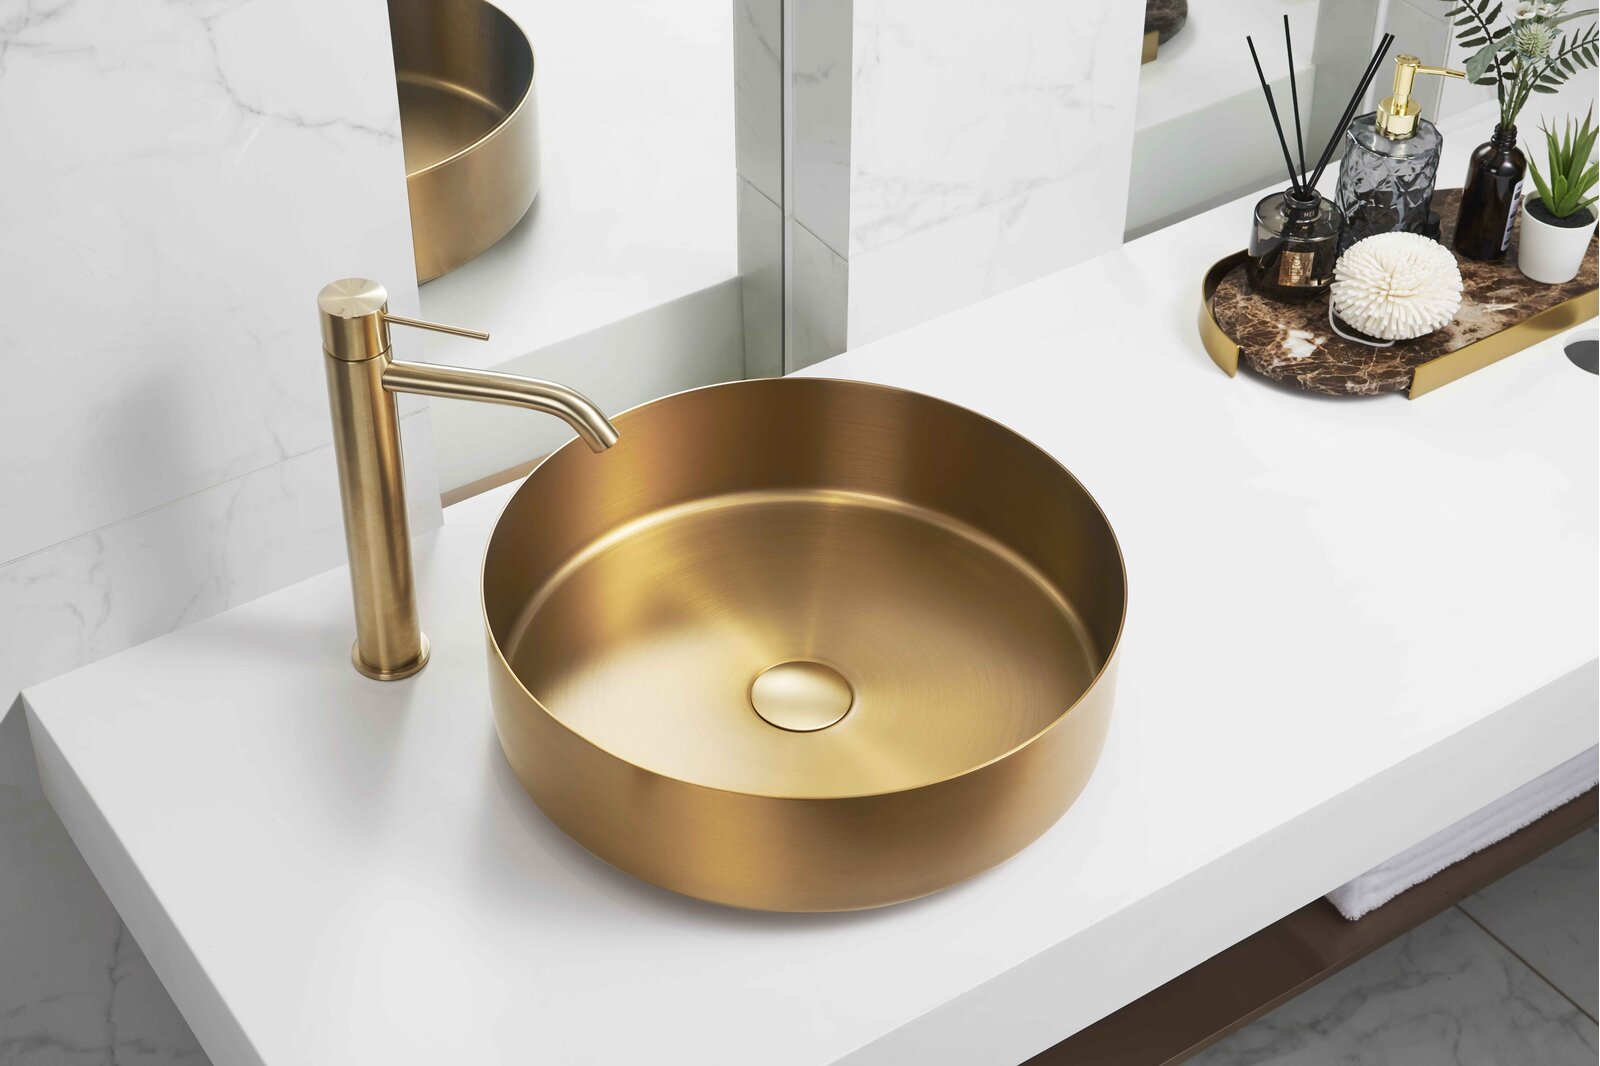 Round+Stainless+Steel+Vessel+Wash+Basin+With+Pop+Up+Drain (2)